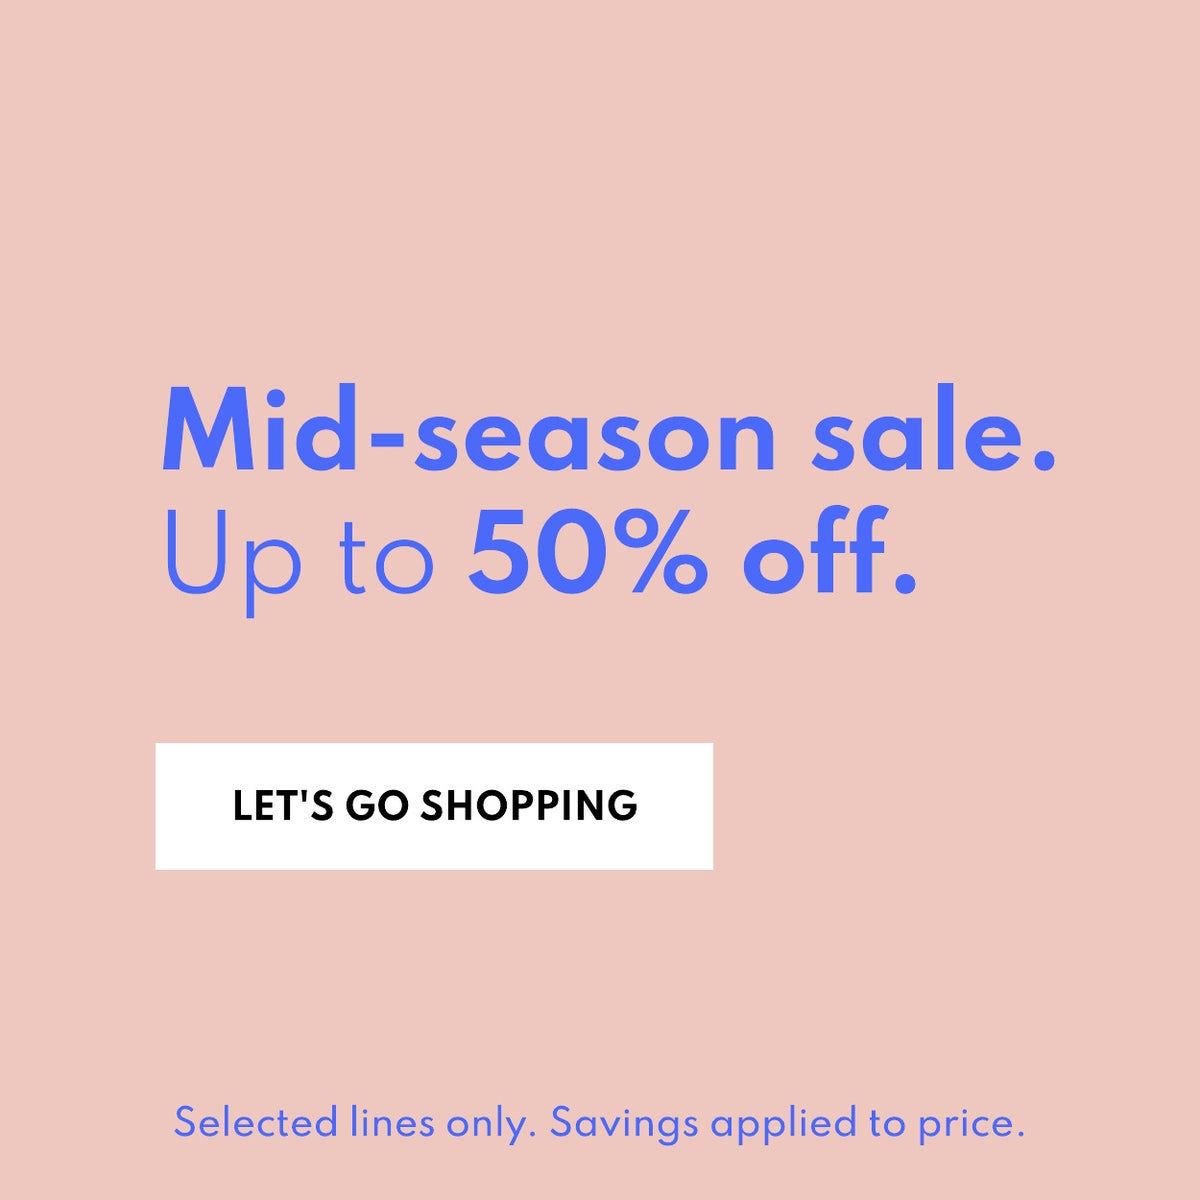 Up to 50% off Mid-Season Sale